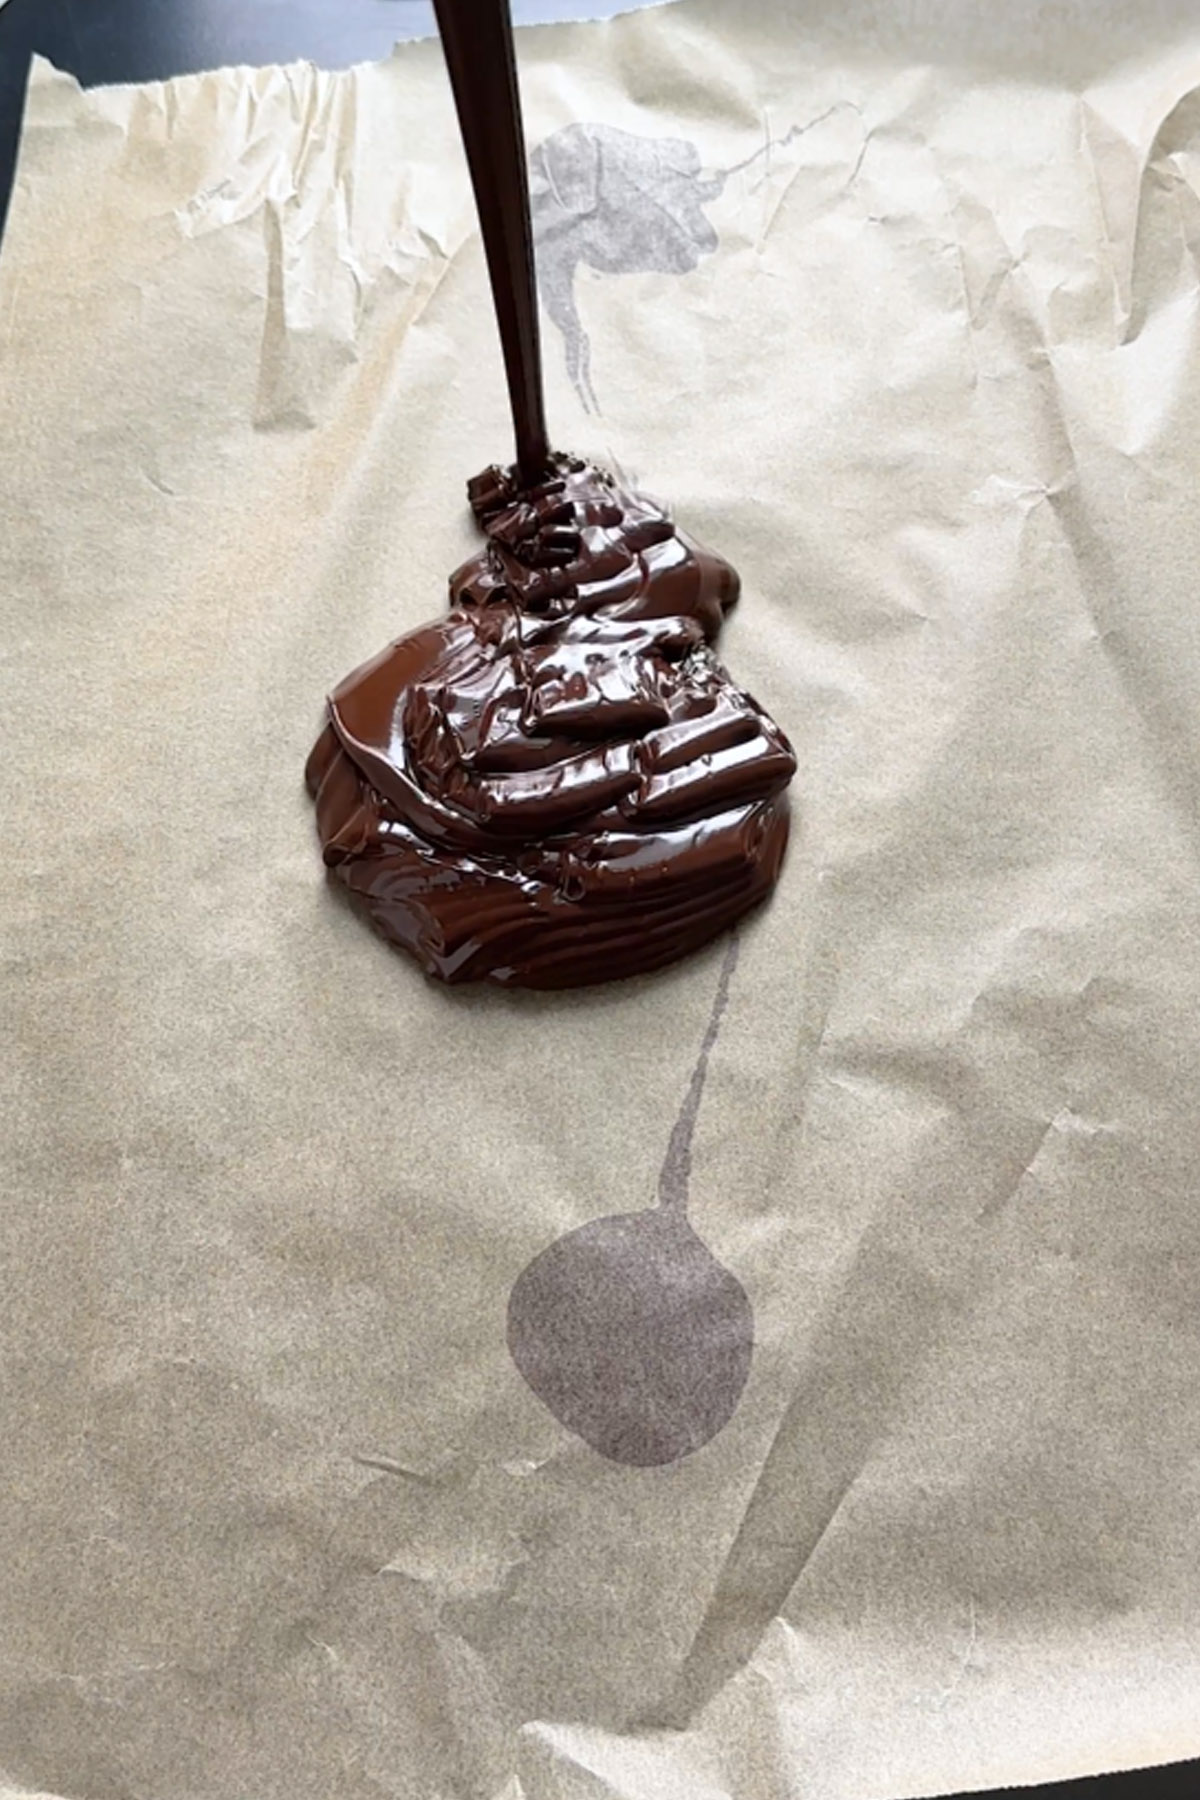 Chocolate is poured onto parchment paper.